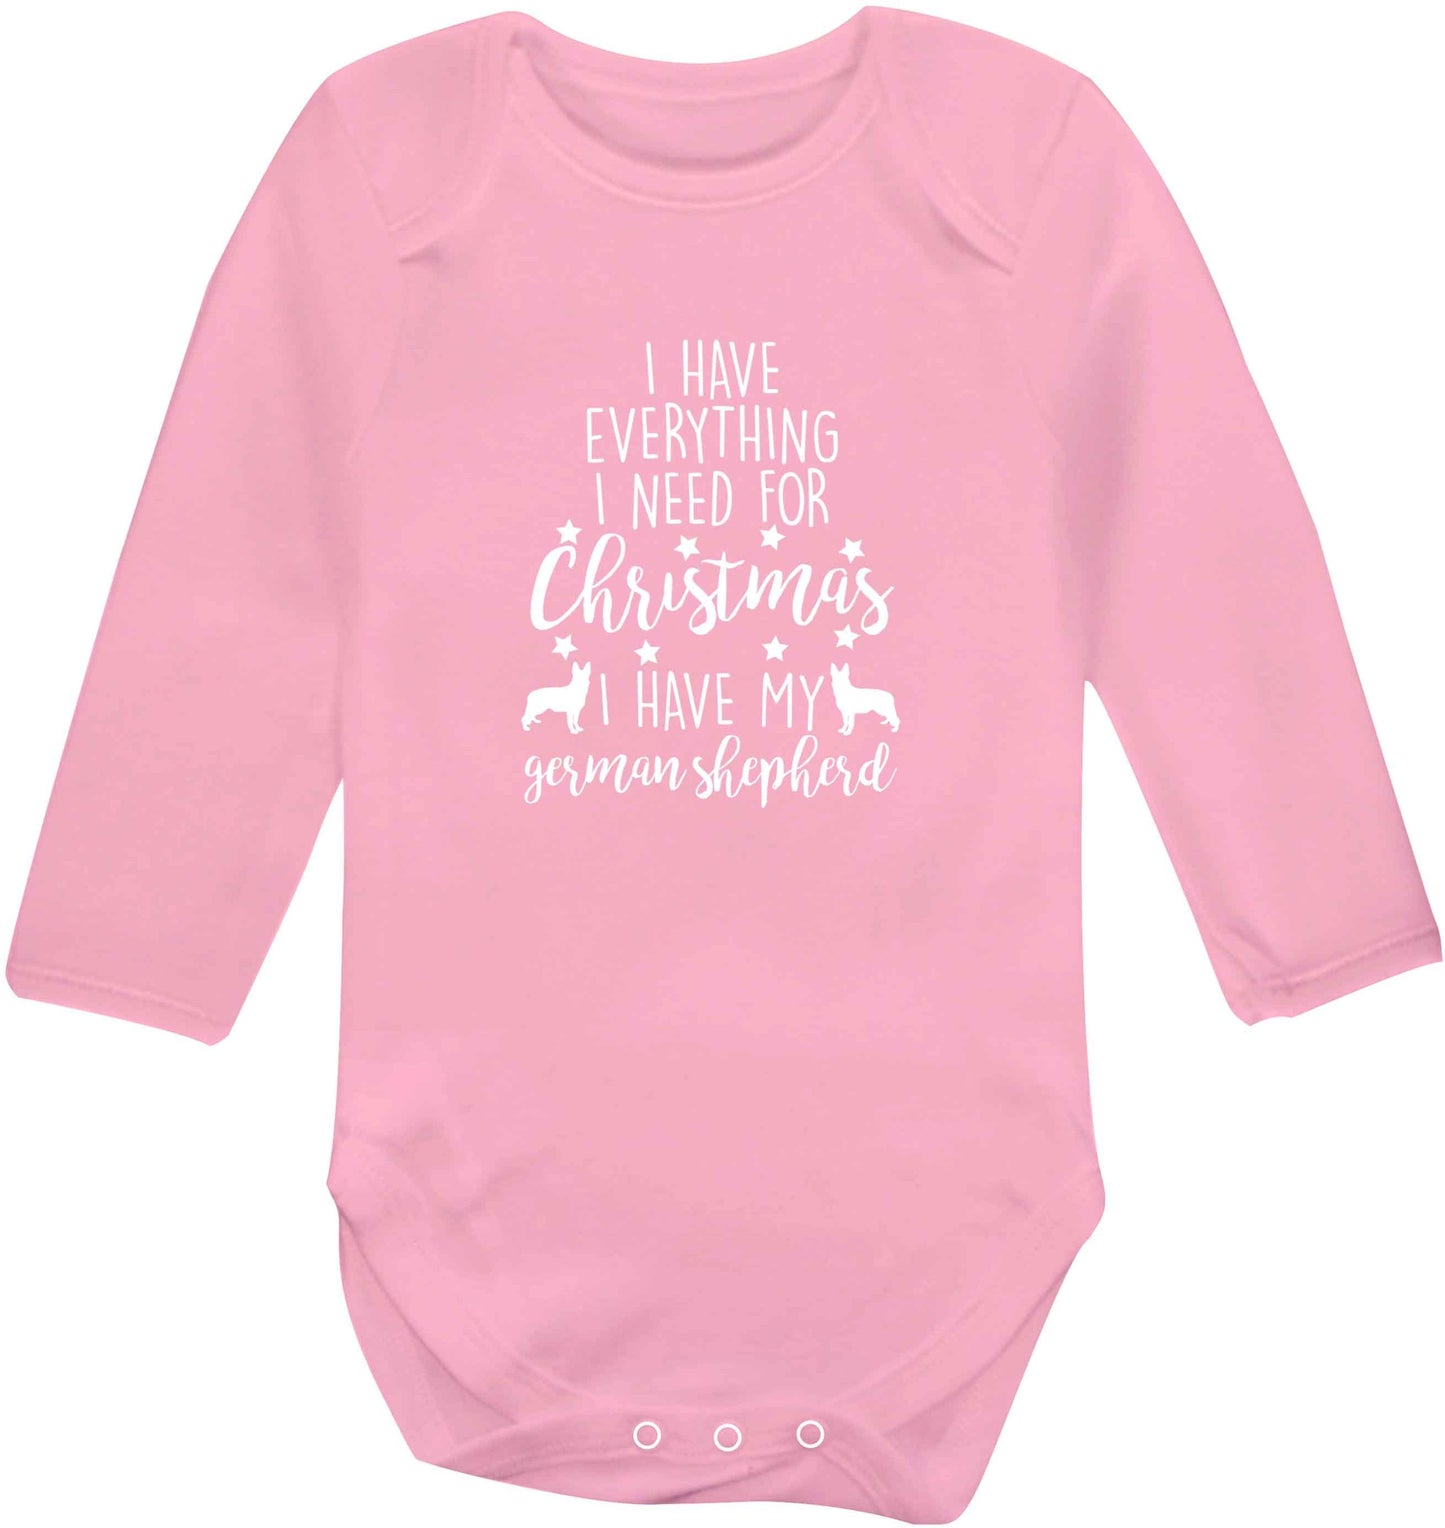 I have everything I need for Christmas I have my german shepherd baby vest long sleeved pale pink 6-12 months